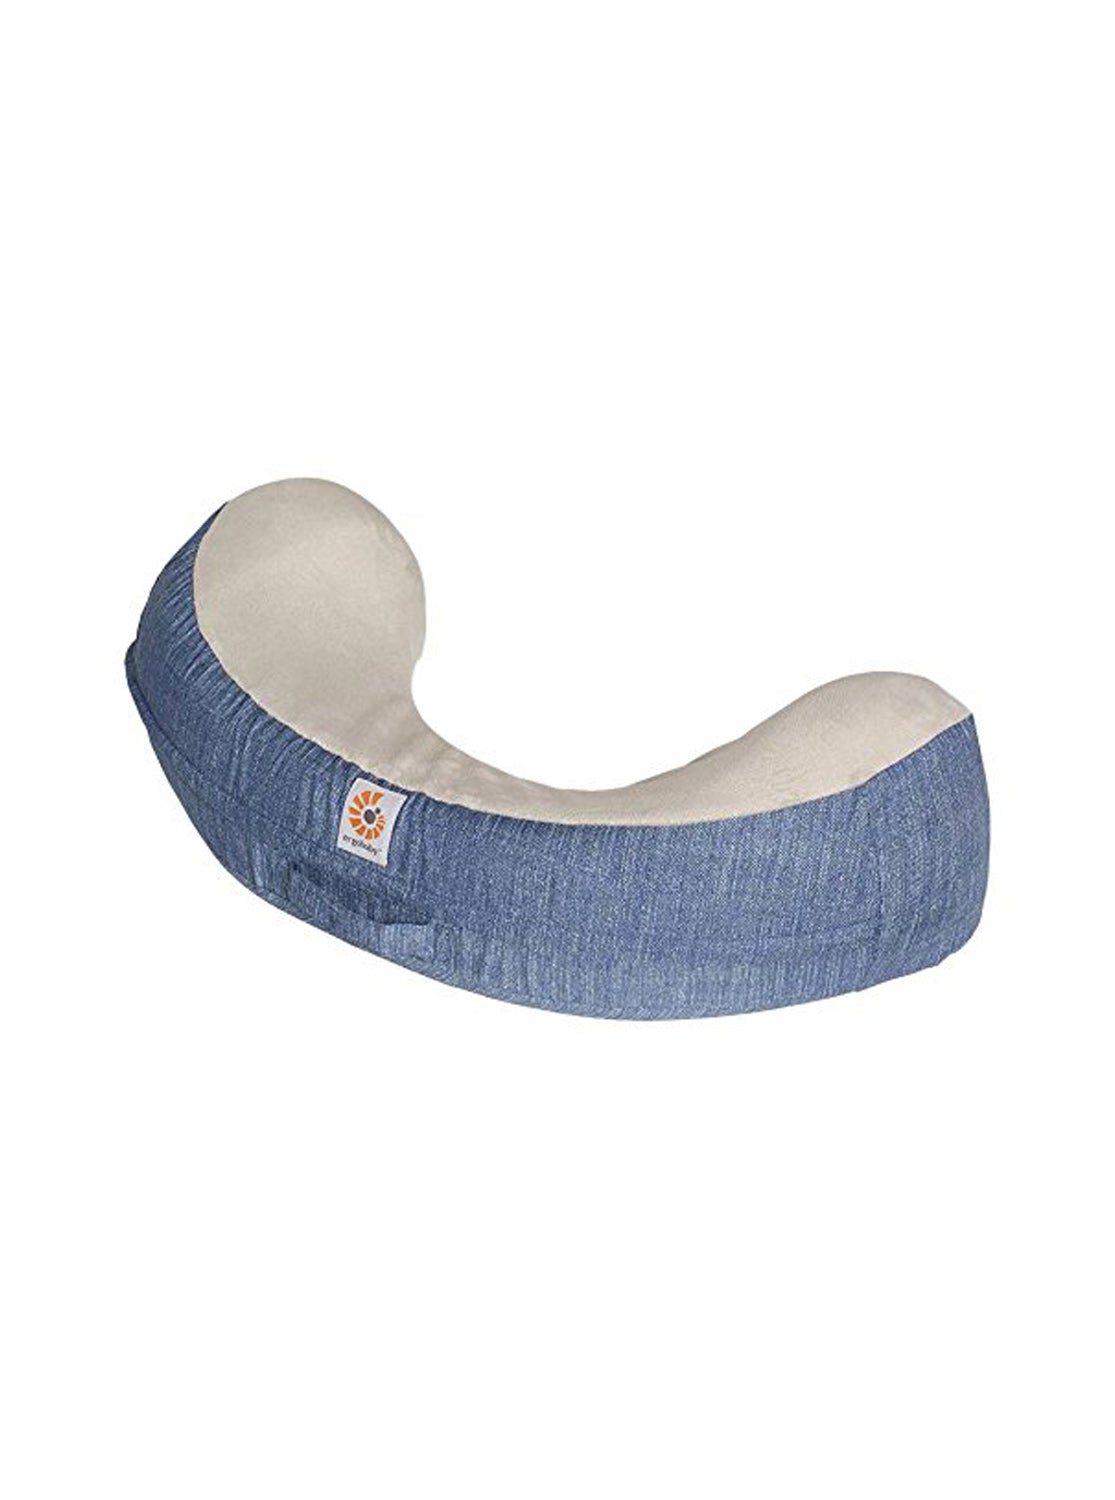 ERGOBABY Natural Curve Nursing Pillow Cover - ANB Baby -$20 - $50